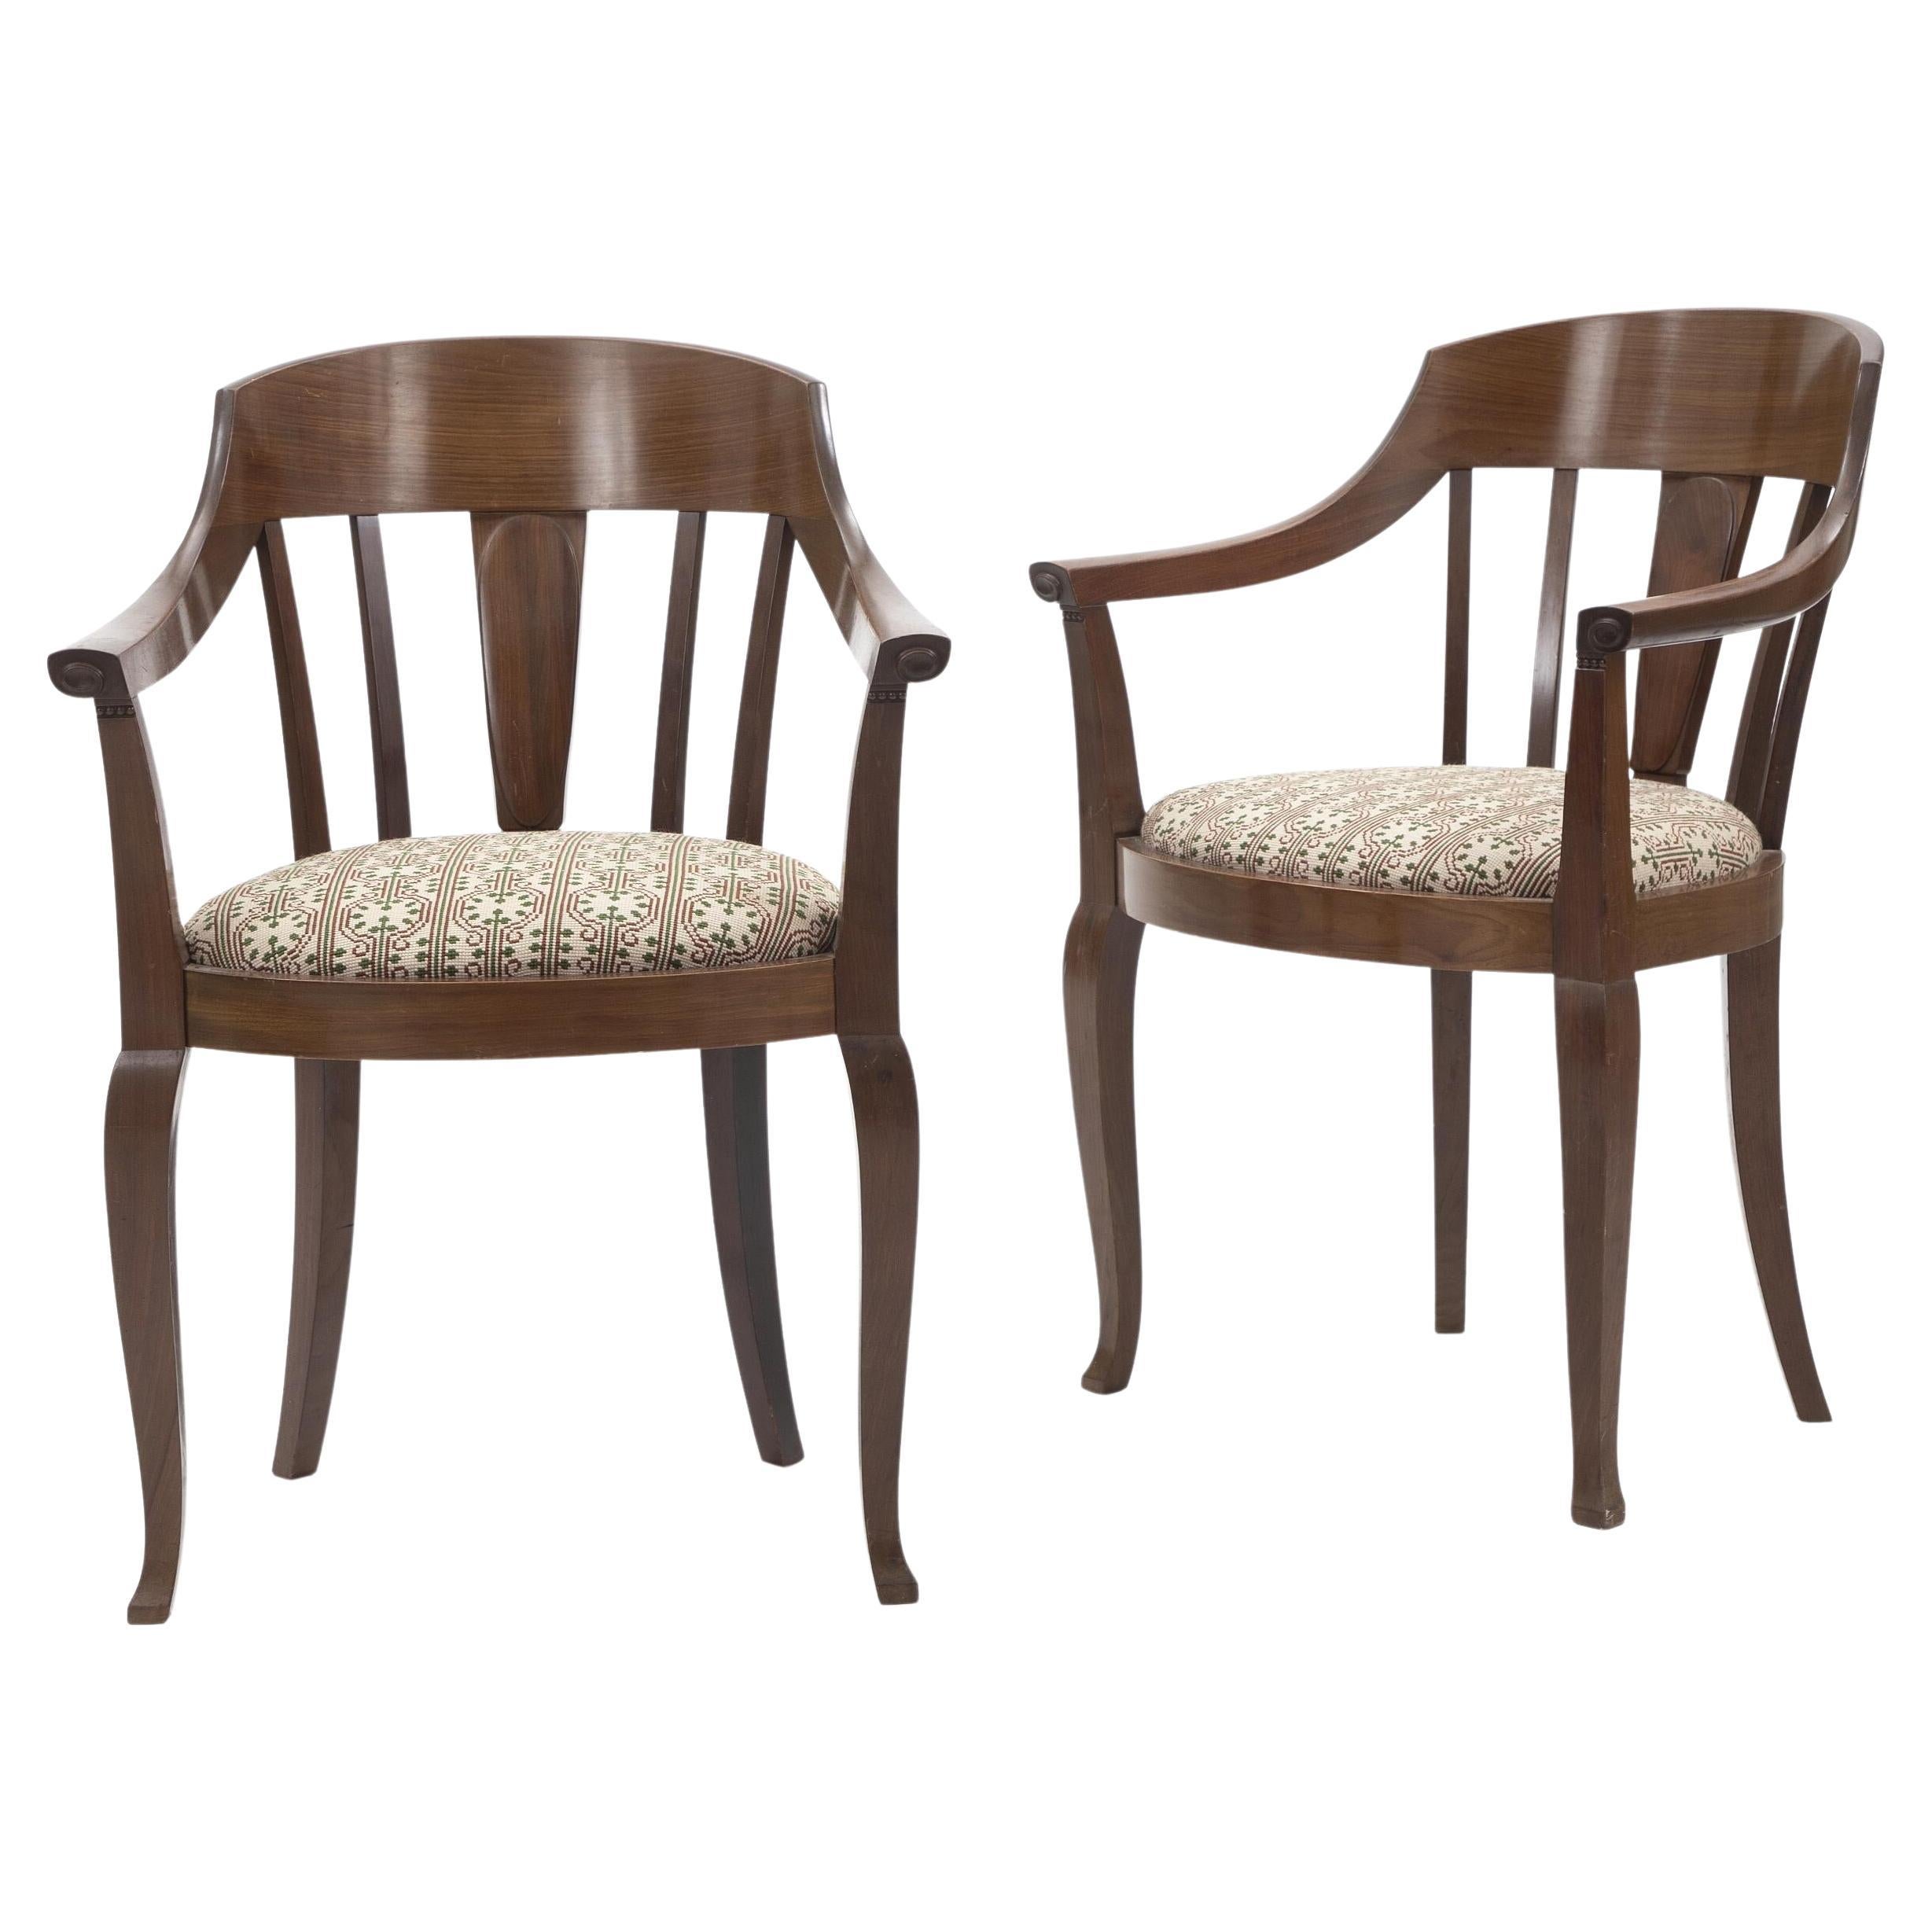 Johan Rohde a Pair of Chairs with Mahogany Frames, 1900-1910